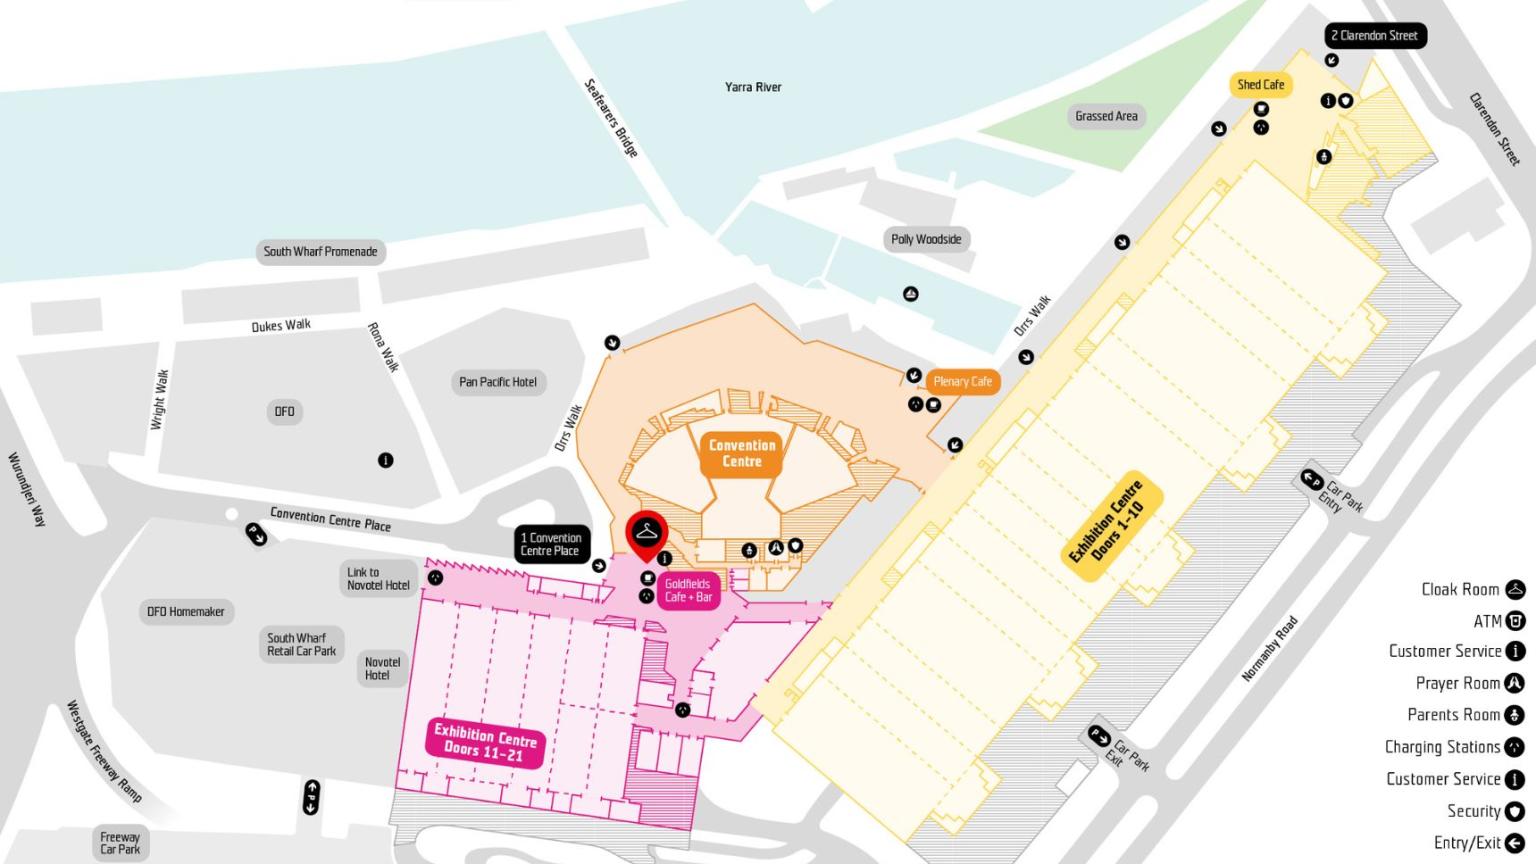 Floor plan of MCEC with a pin point highlighting the location of the cloak room. 